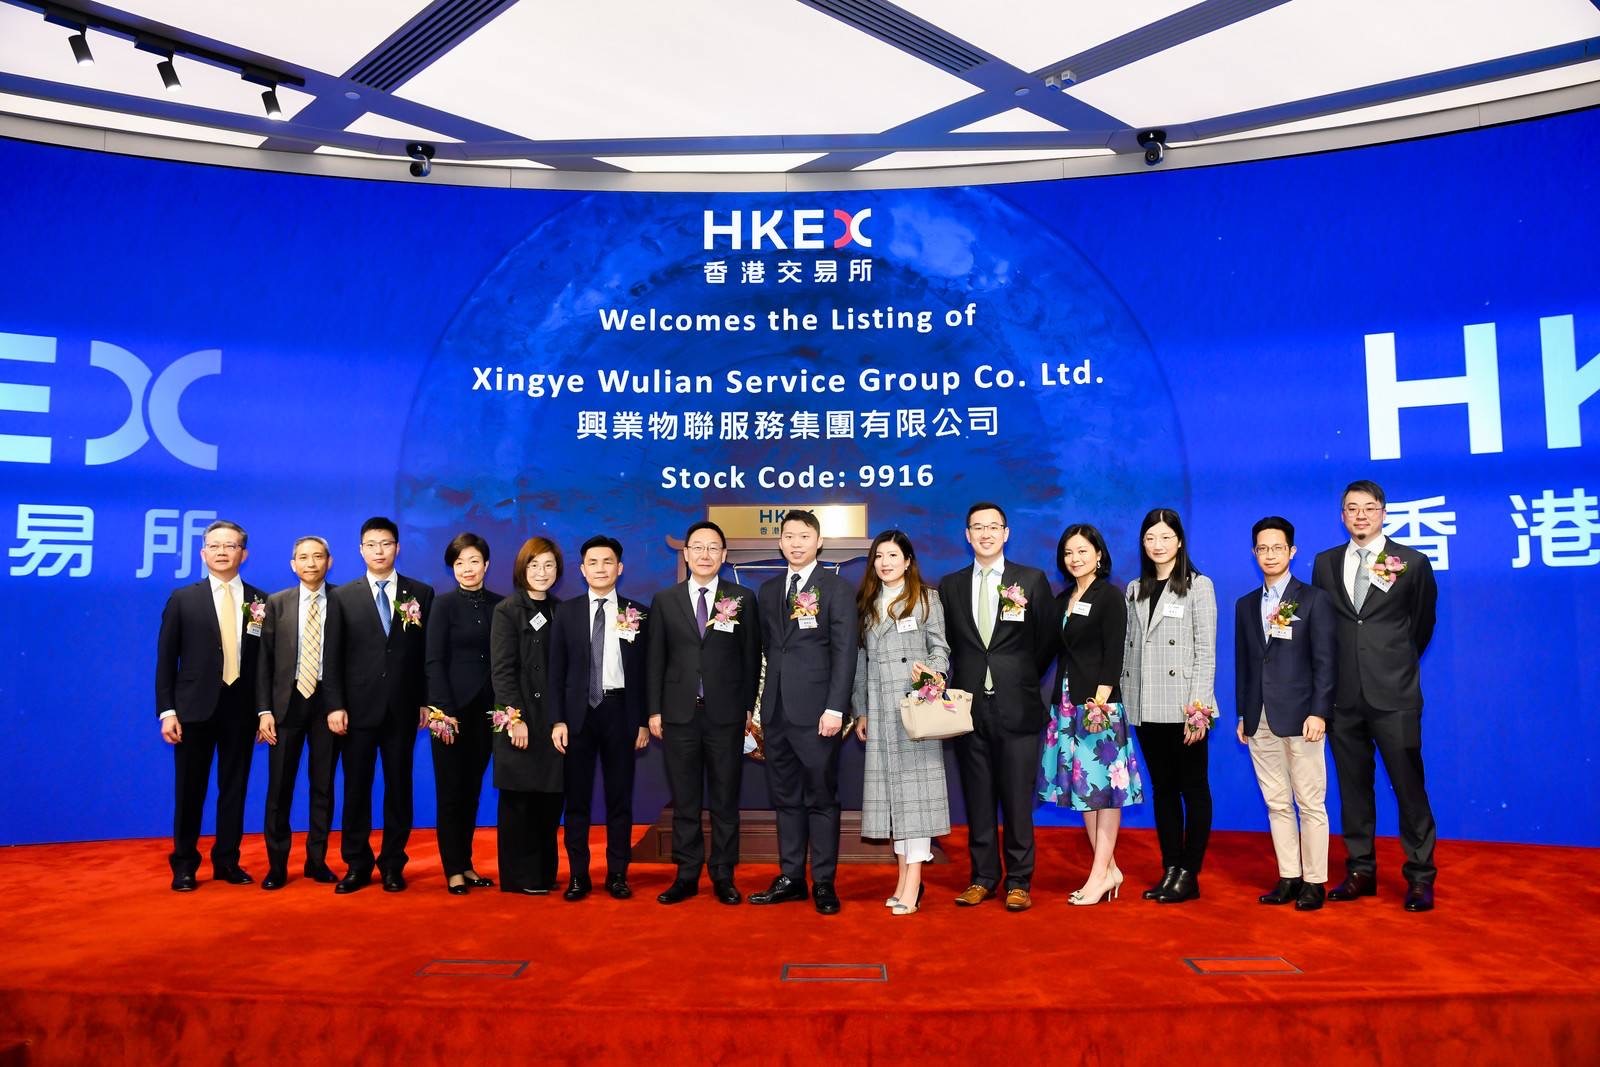 ONC advised on the listing of Xingye Wulian Service Group Co. Ltd.